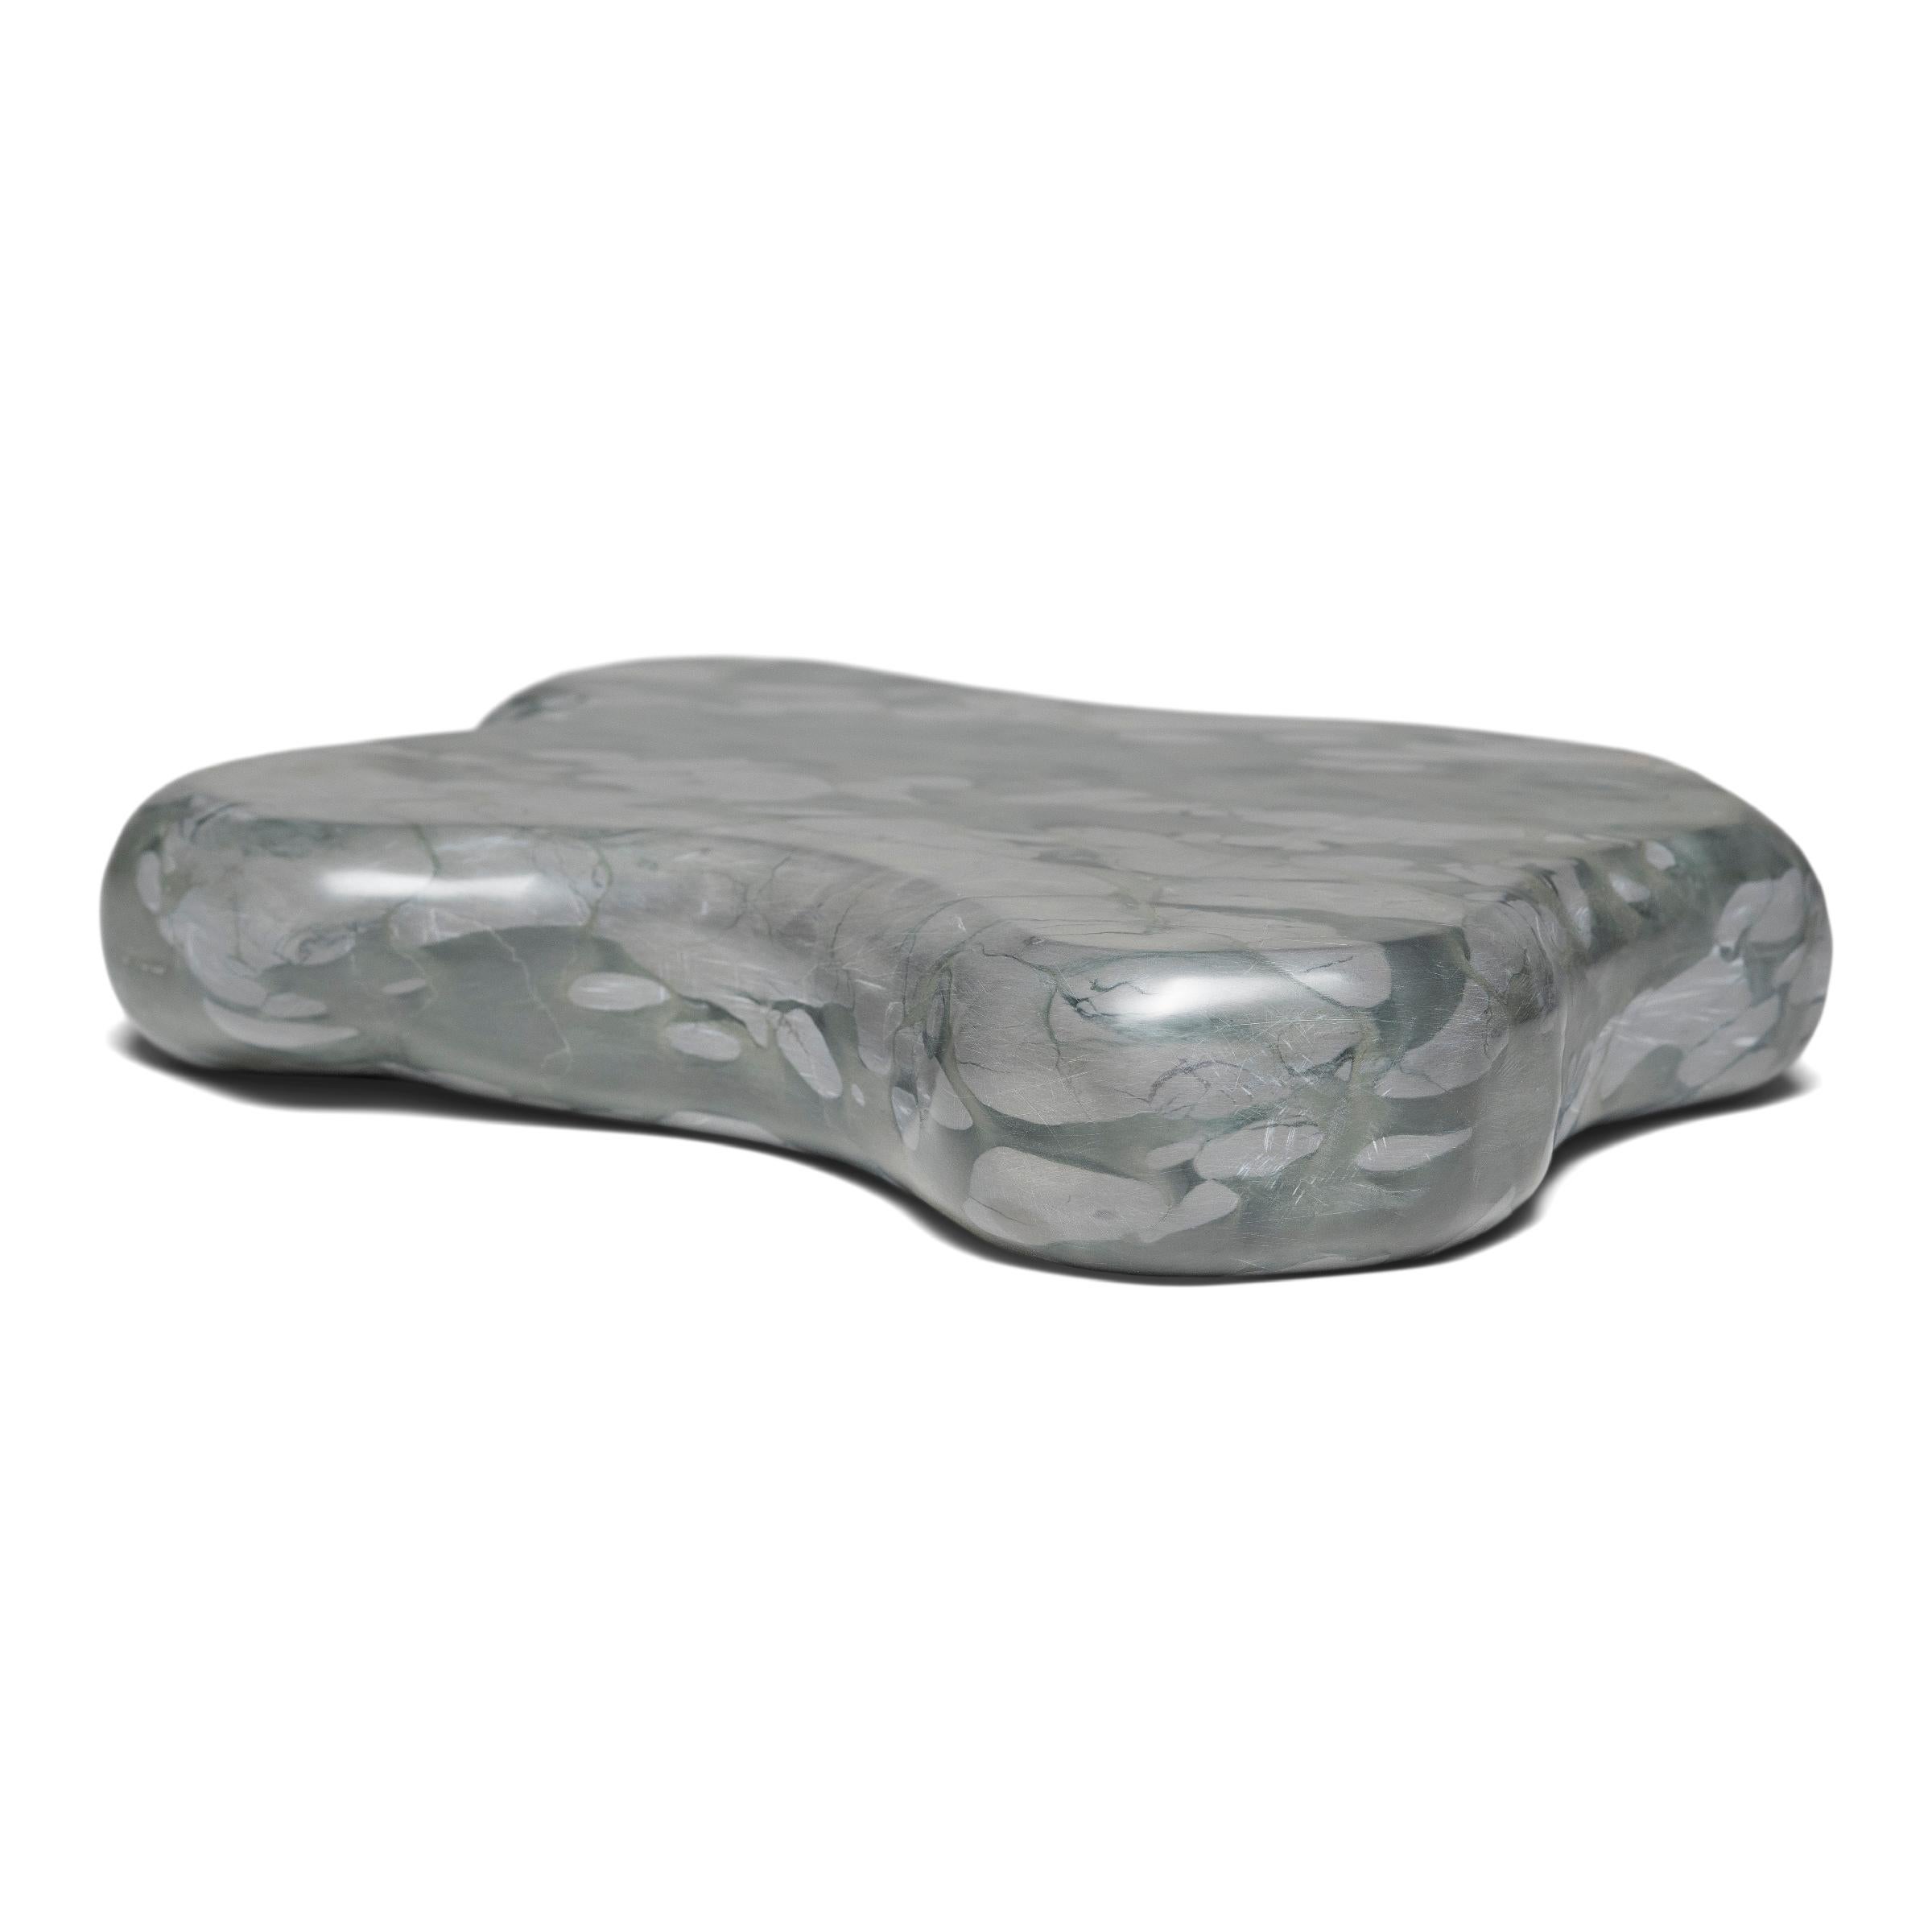 This small stone slab tray is formed of zhenzhu stone, a conglomerate limestone extracted from Lake Tai in China's Jiangsu province. Speckled with painterly daubs of color, the blue-grey puddingstone has been prized by scholars for centuries as a